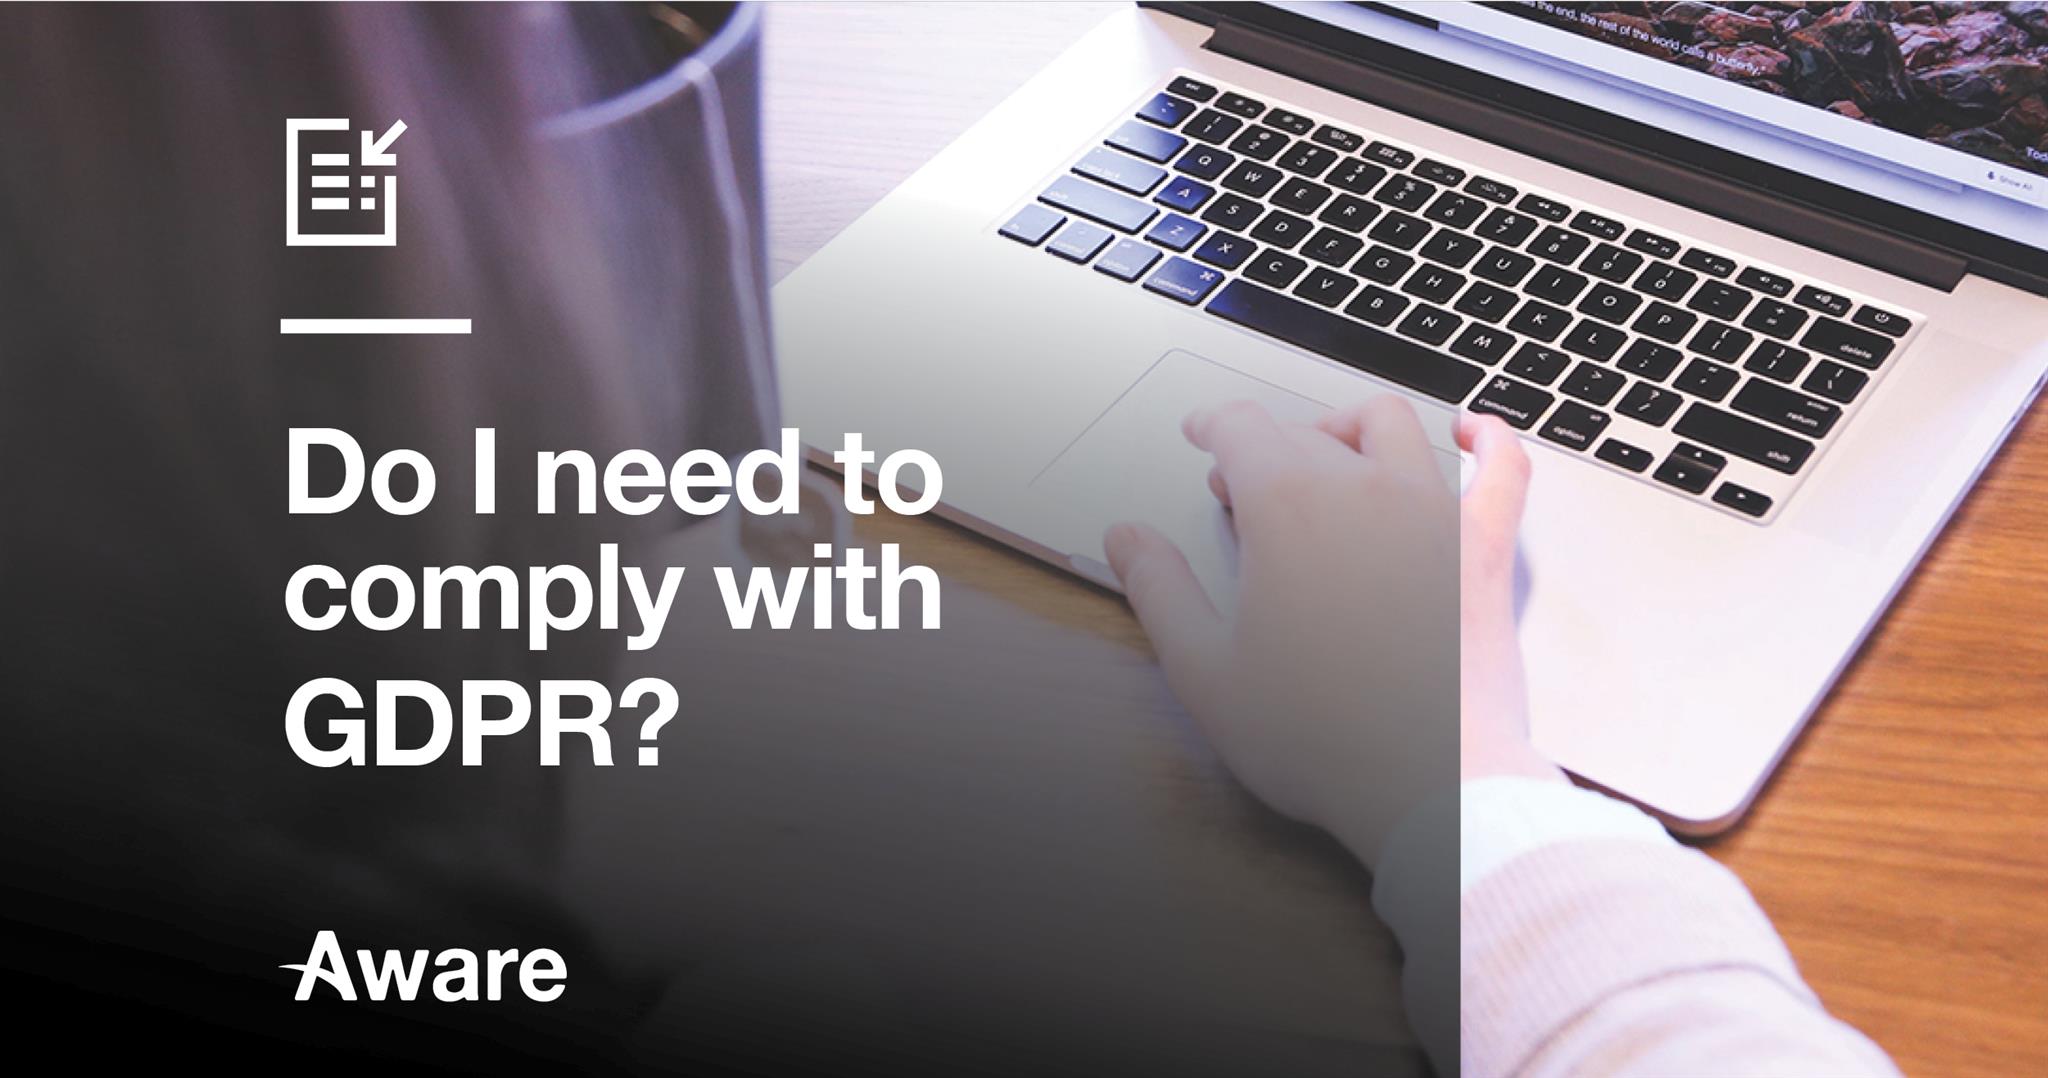 Do I need to comply with GDPR?